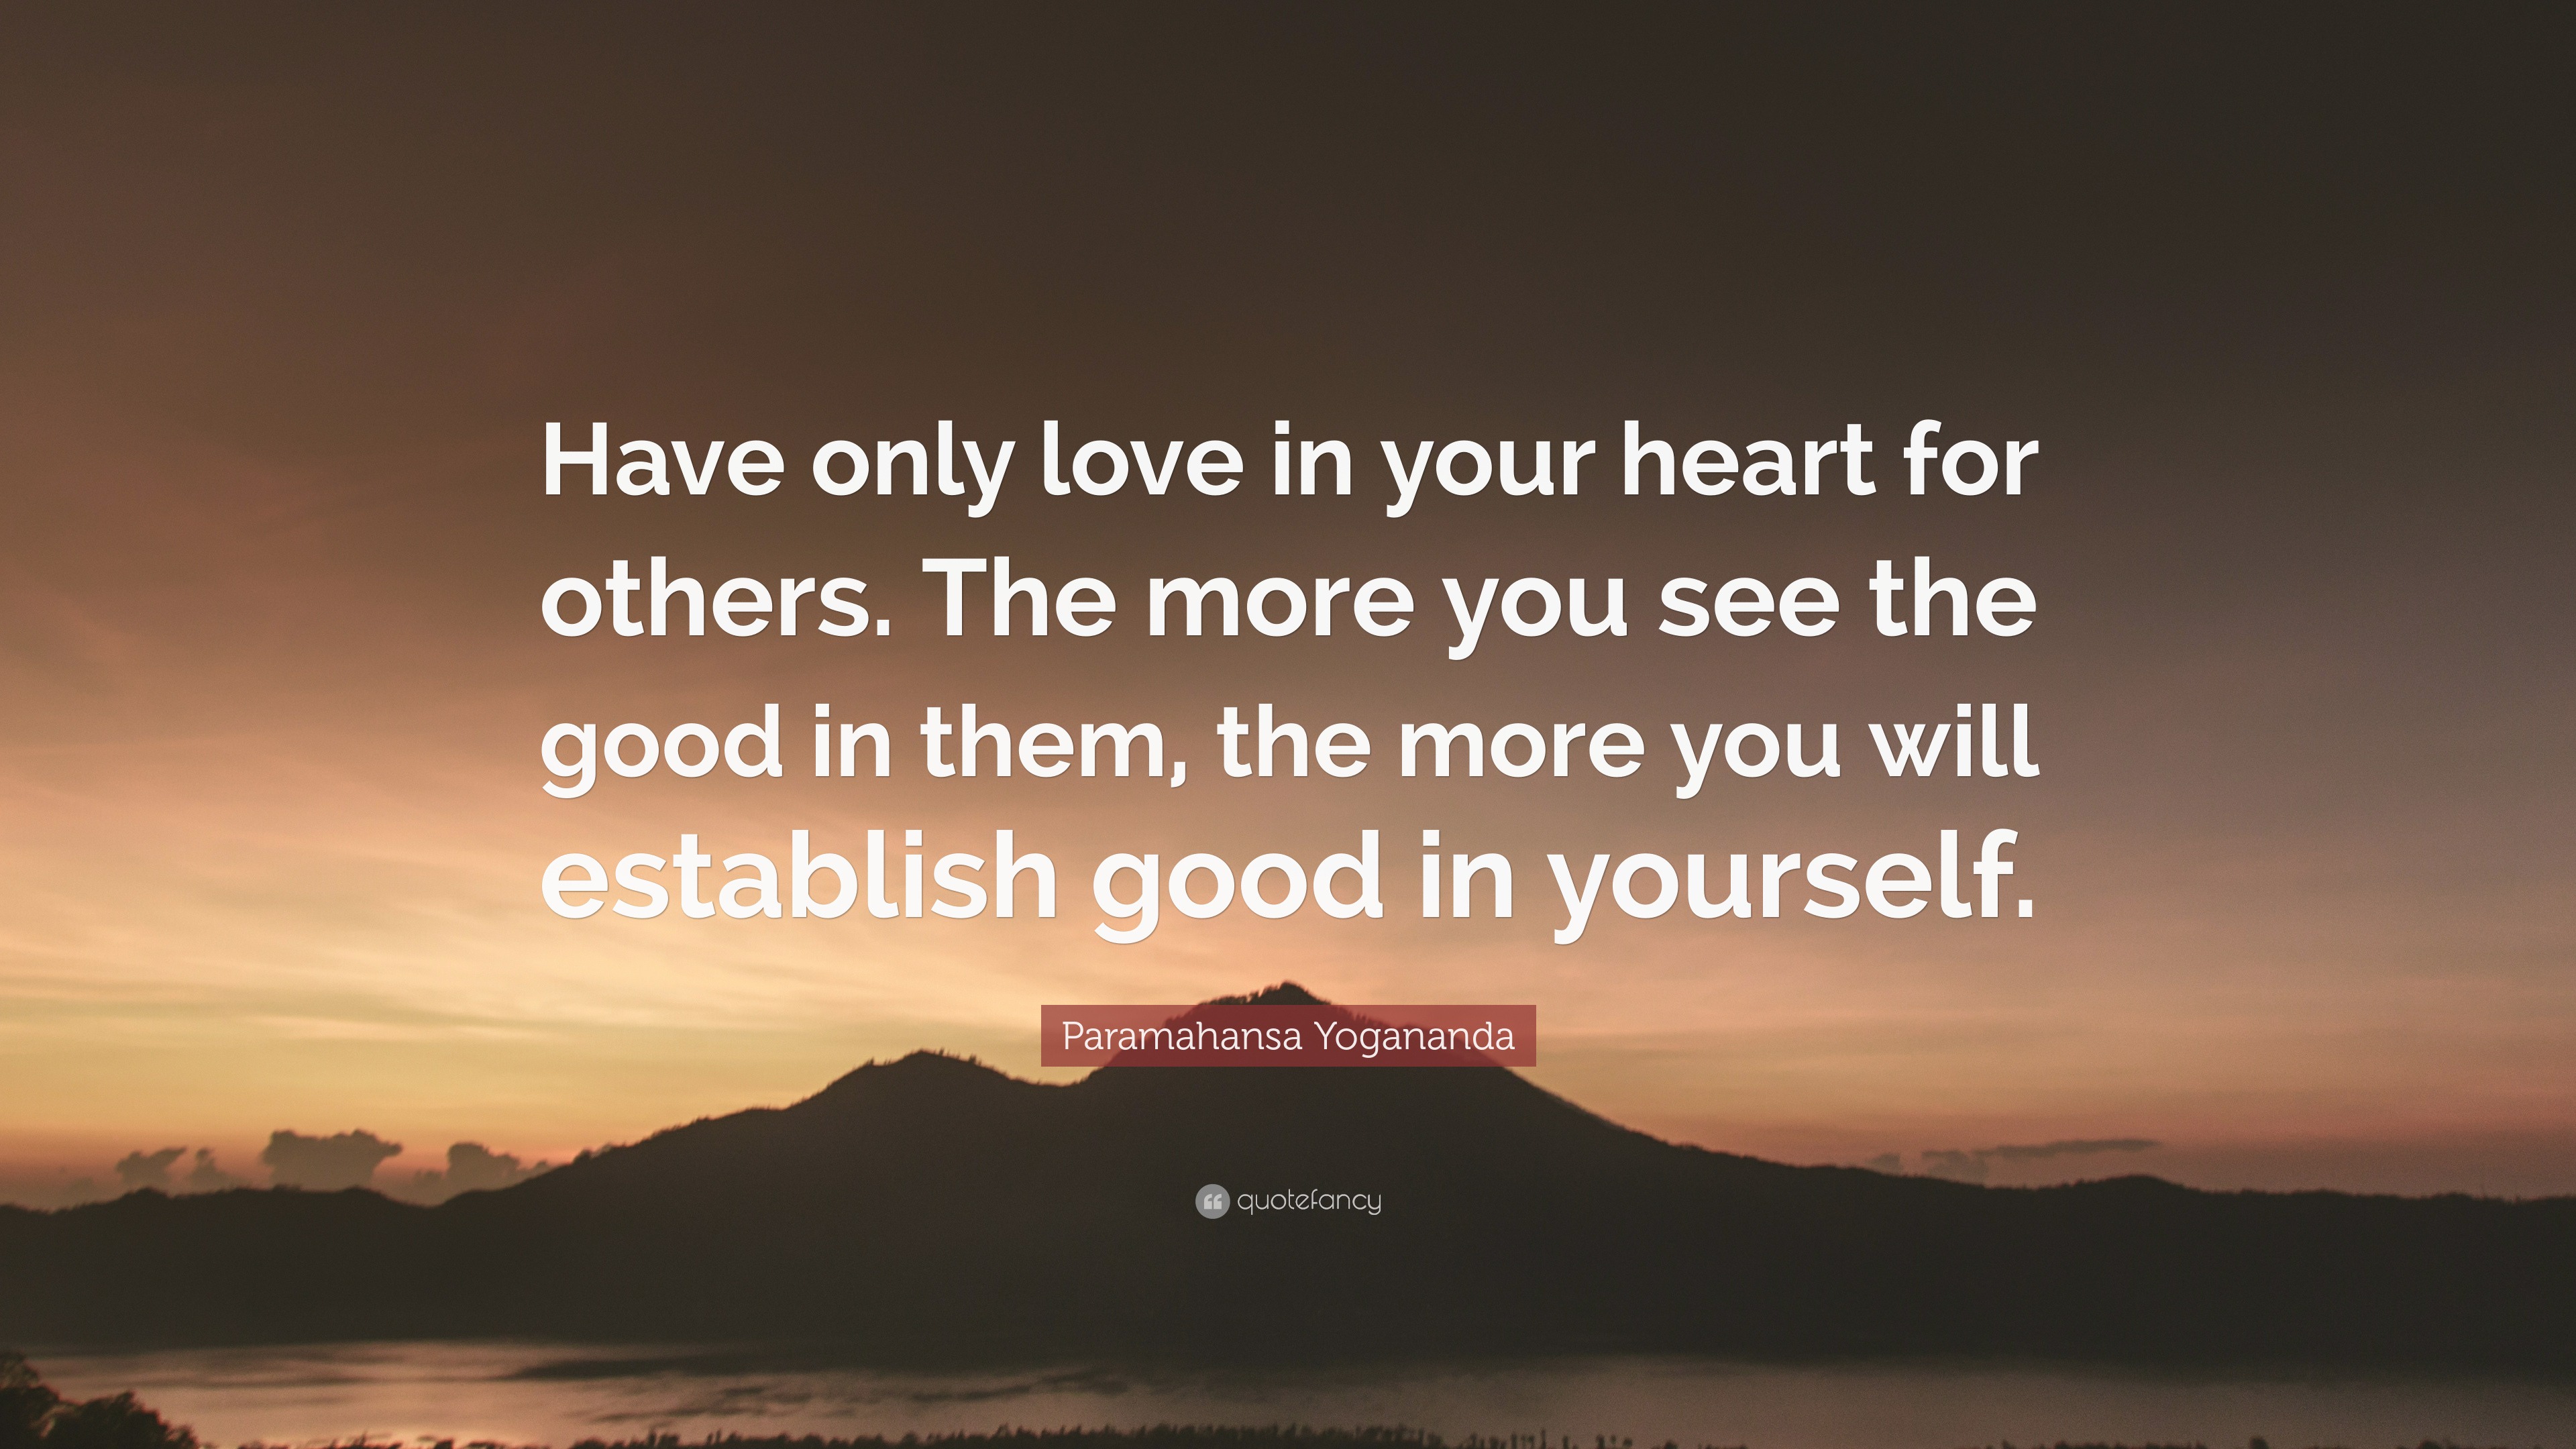 Paramahansa Yogananda Quote “Have only love in your heart for others The more